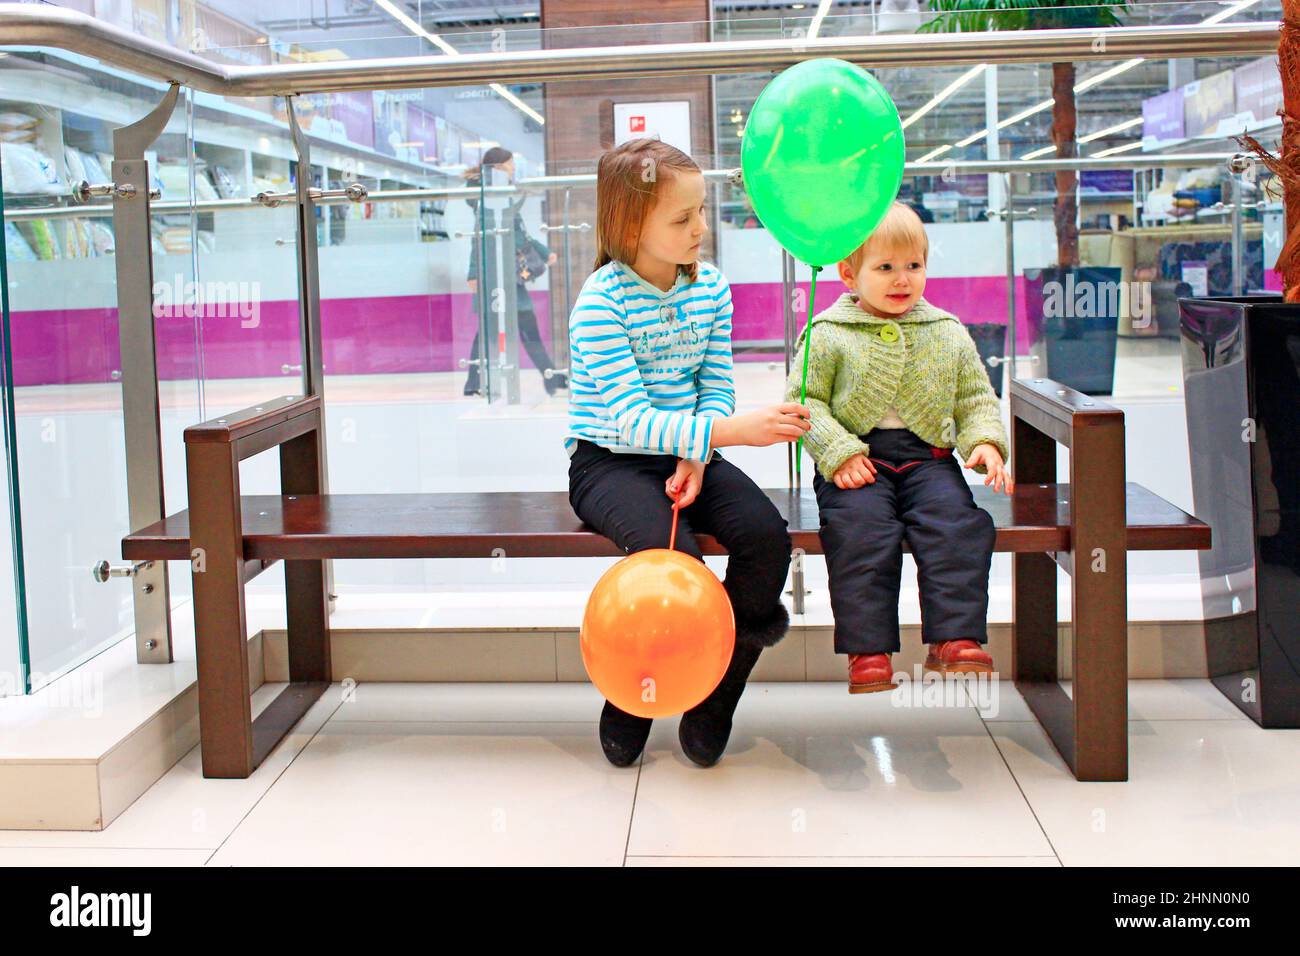 Older sister gives offended younger sister balloon. Childish emotions Stock Photo